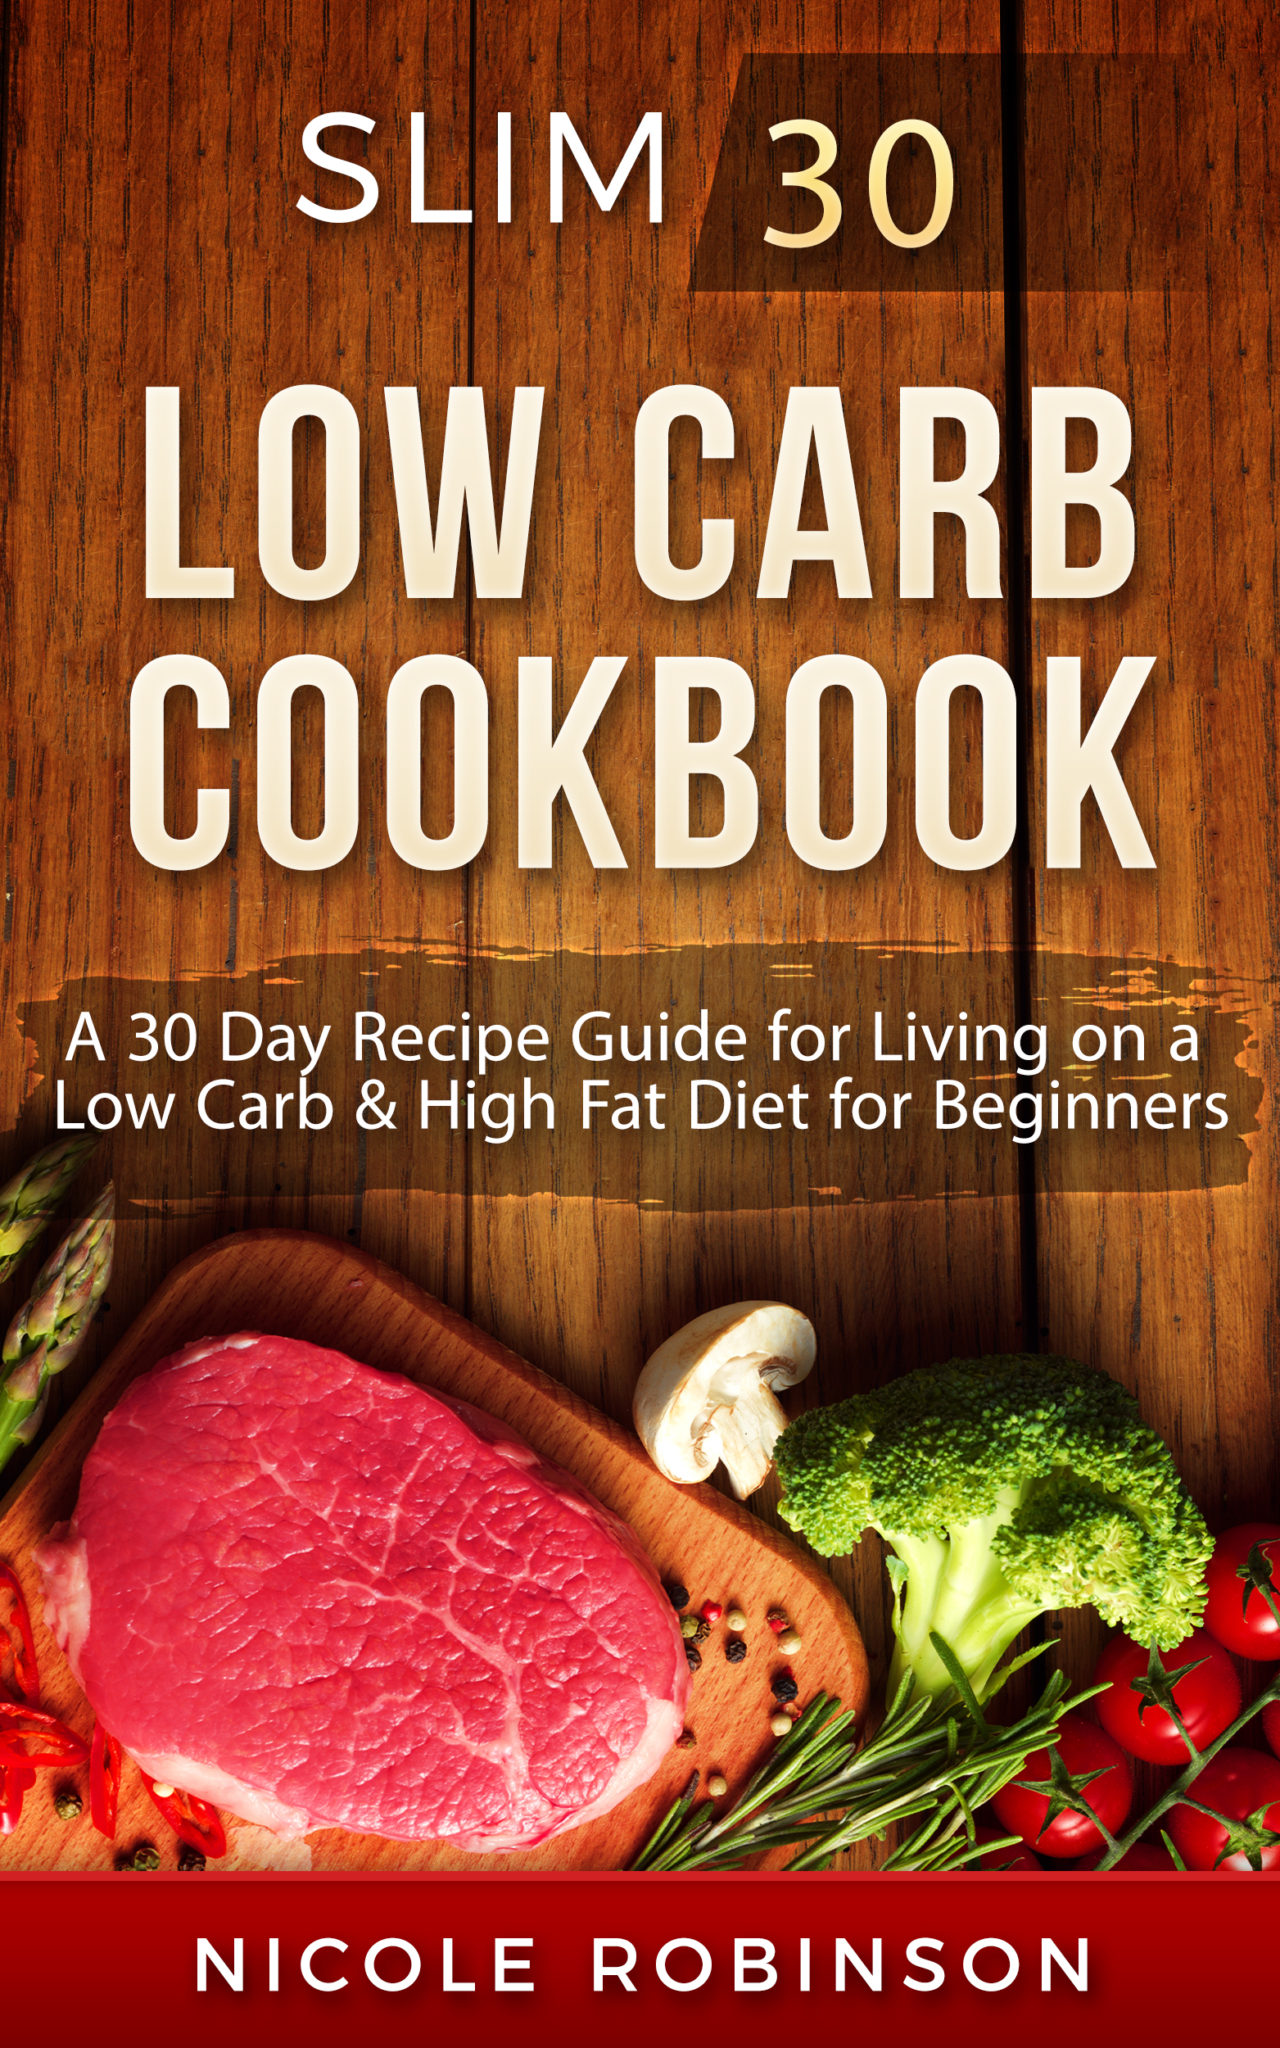 FREE: Low Carb Cookbook: Slim 30 – A 30 Day Recipe Guide for Living on a Low Carb & High Fat Diet for Beginners (Low Carb Cookbook, High Fat Recipes, Healthy Diet, Low Carb for Beginners) by Nicole Robinson